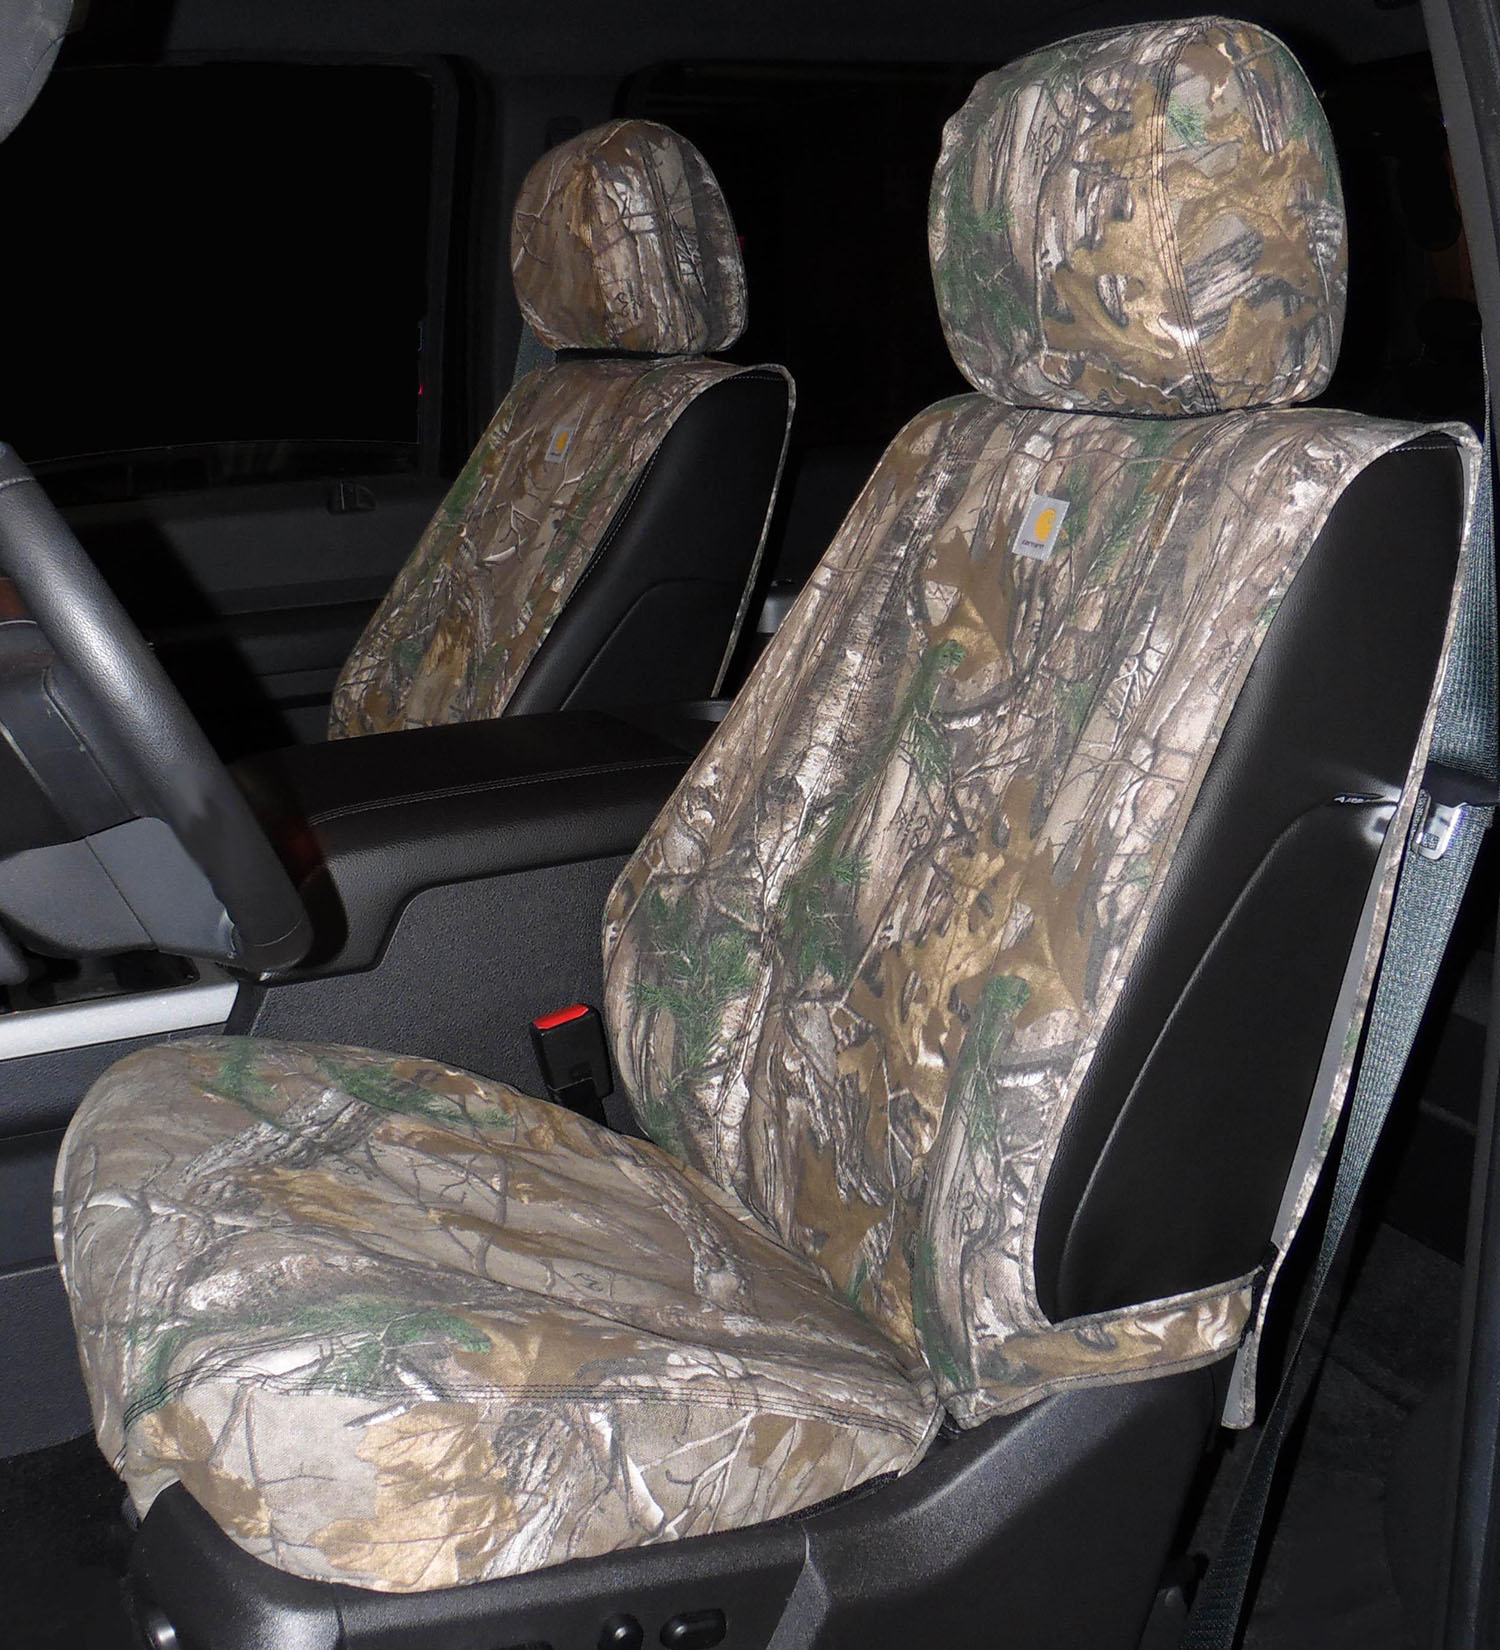 Image for Seat Savers - Front, 40/20/40, Realtree Brown from AccessoriesCanada